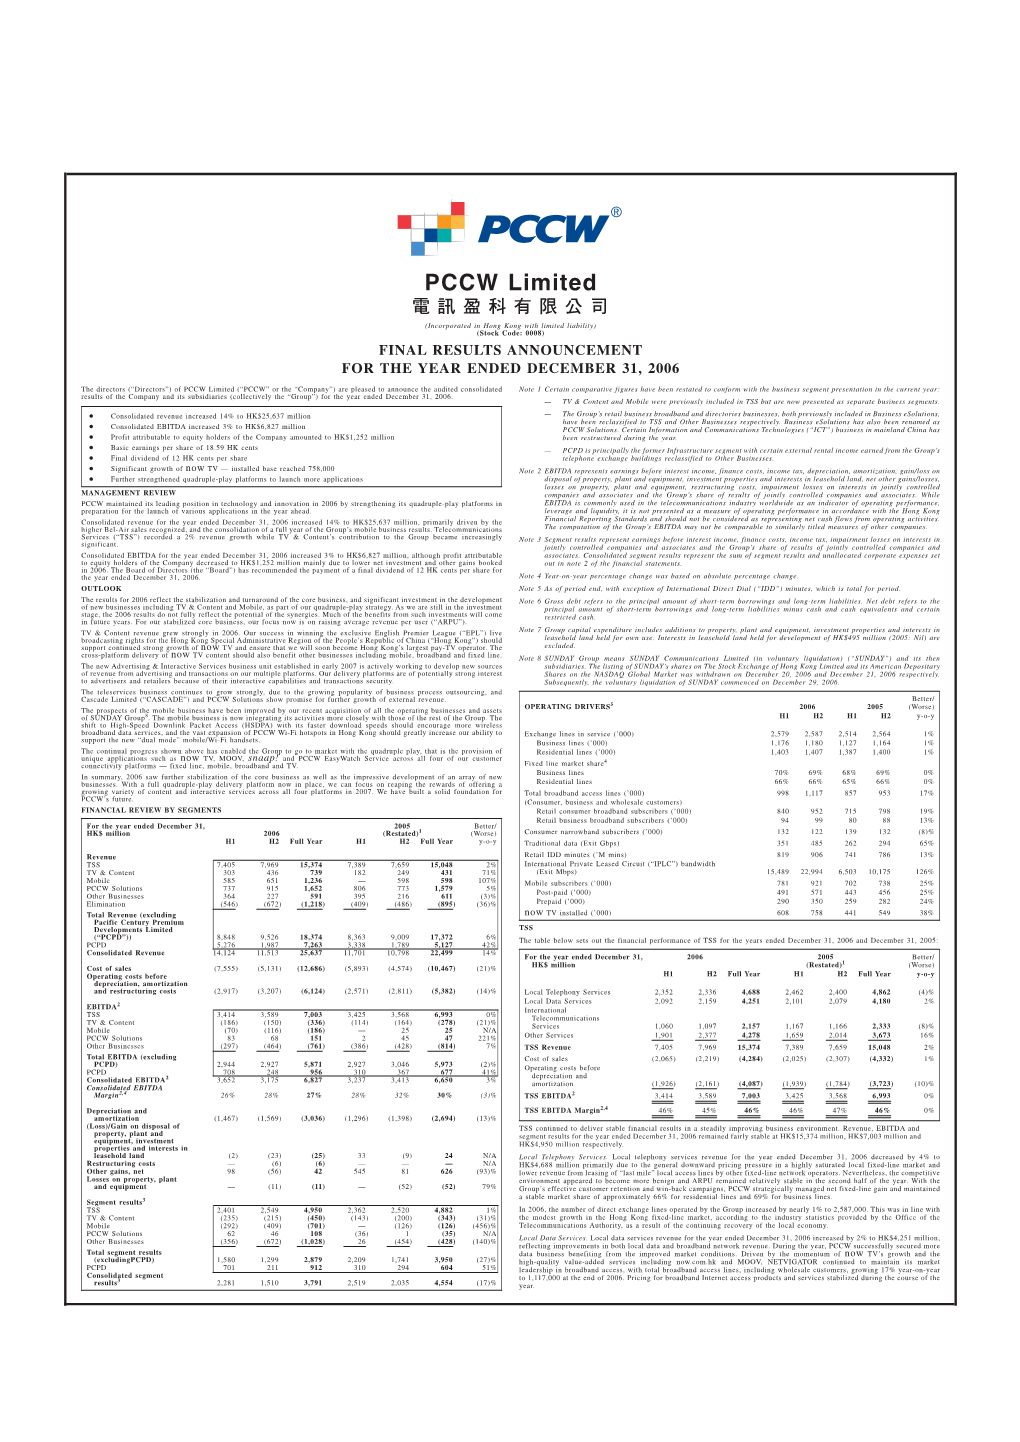 PCCW Limited